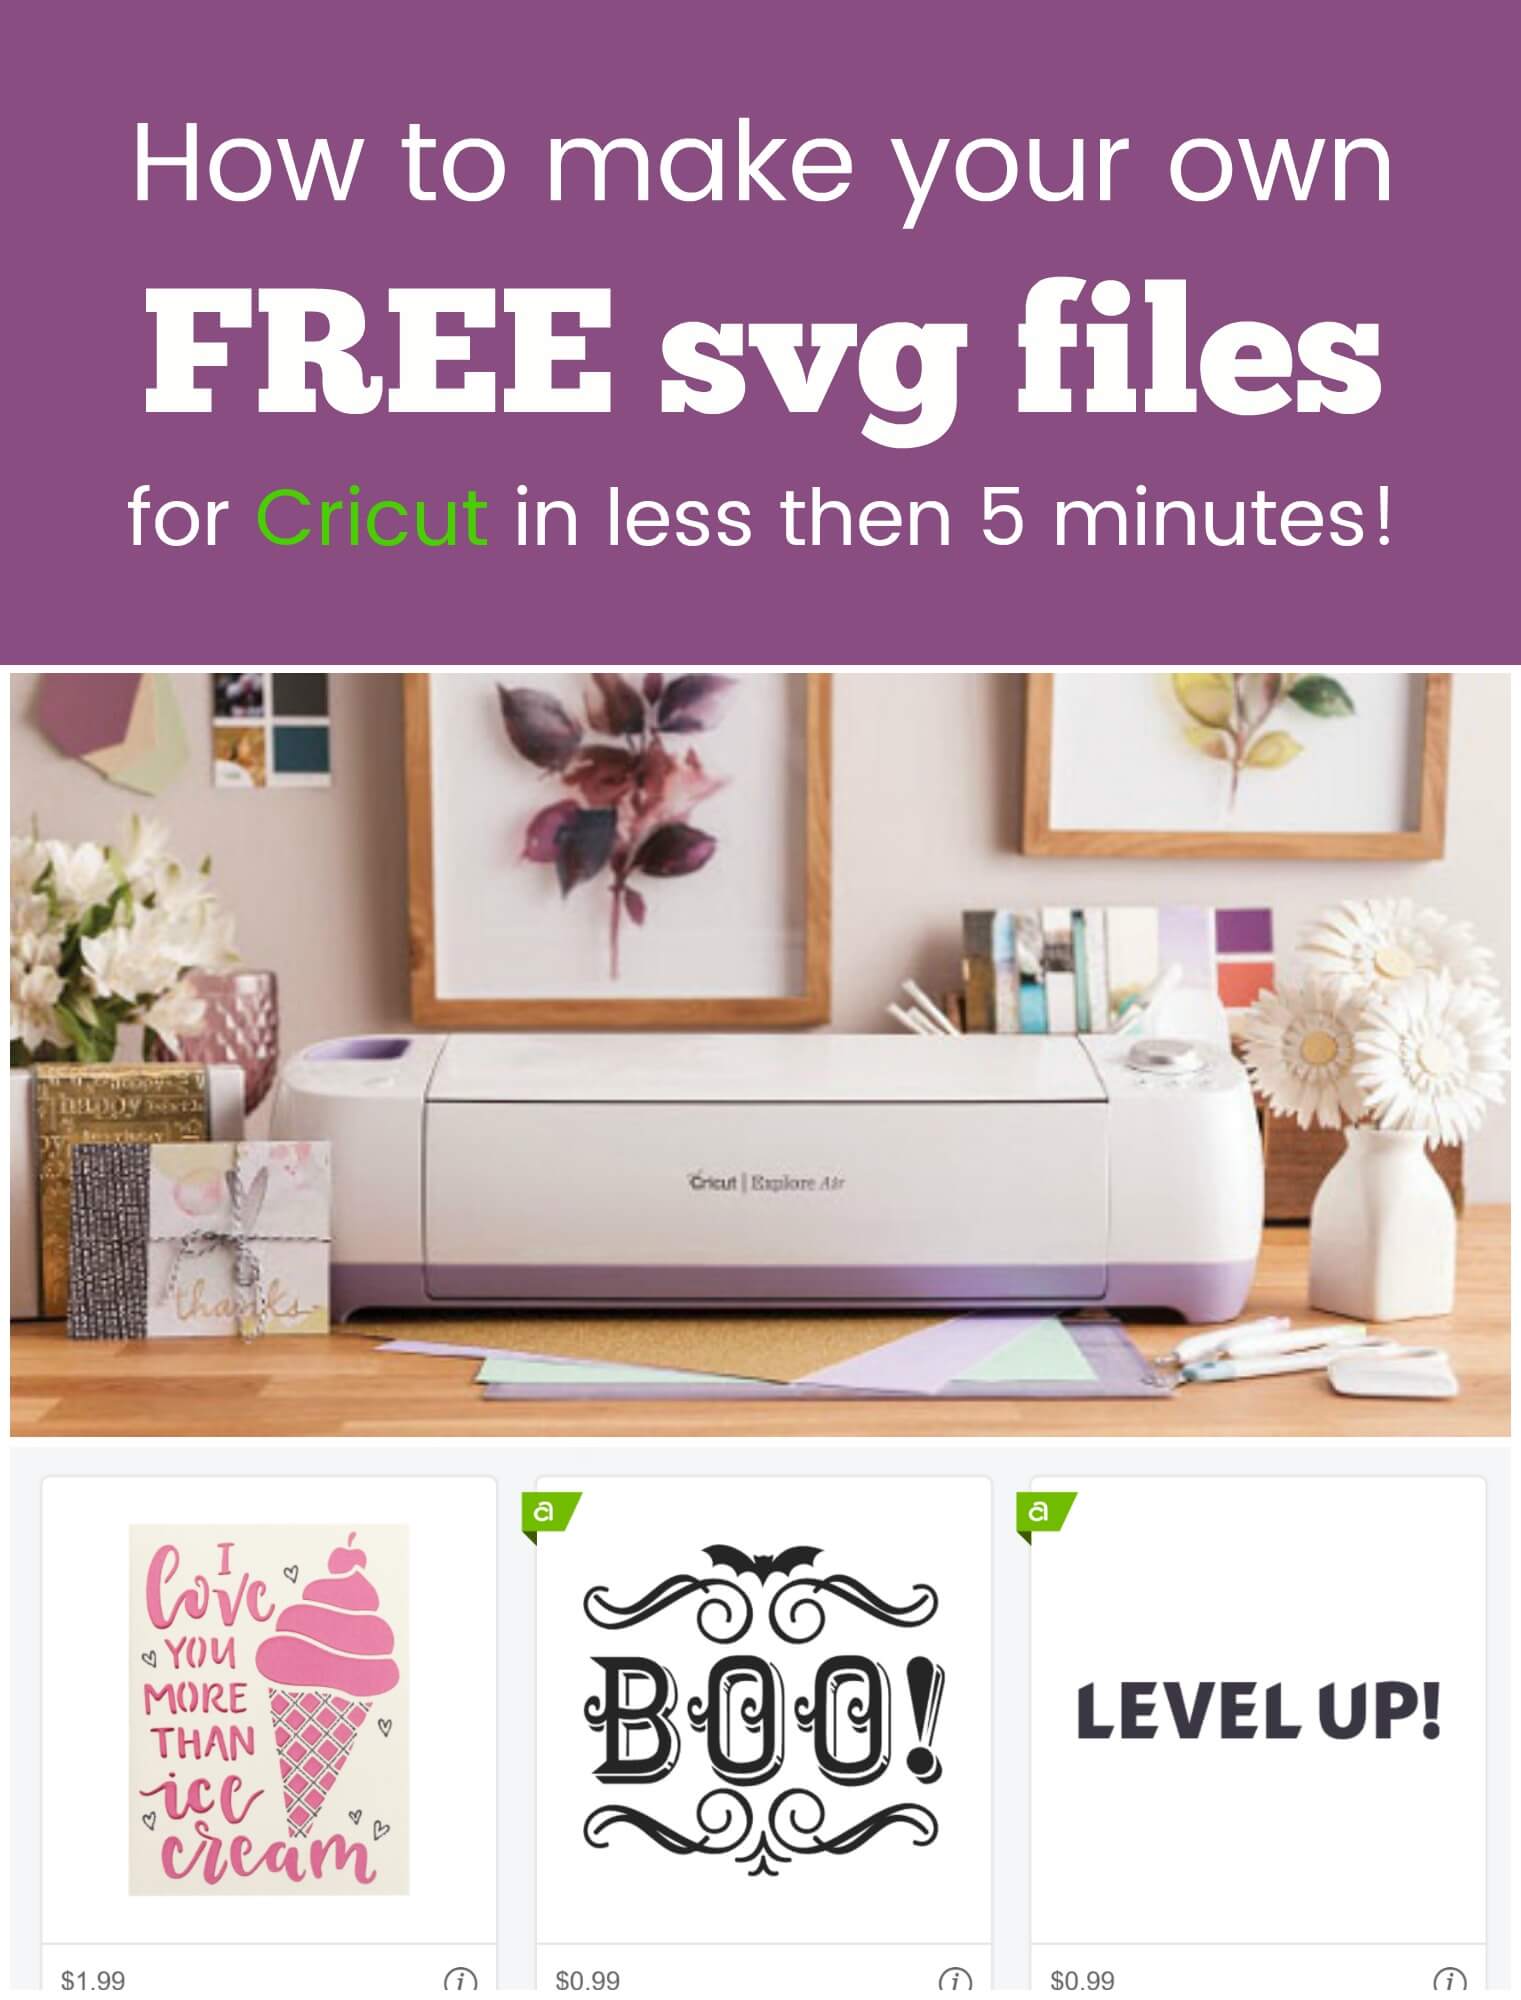 How to Convert an Image to SVG to use in Cricut Design Space